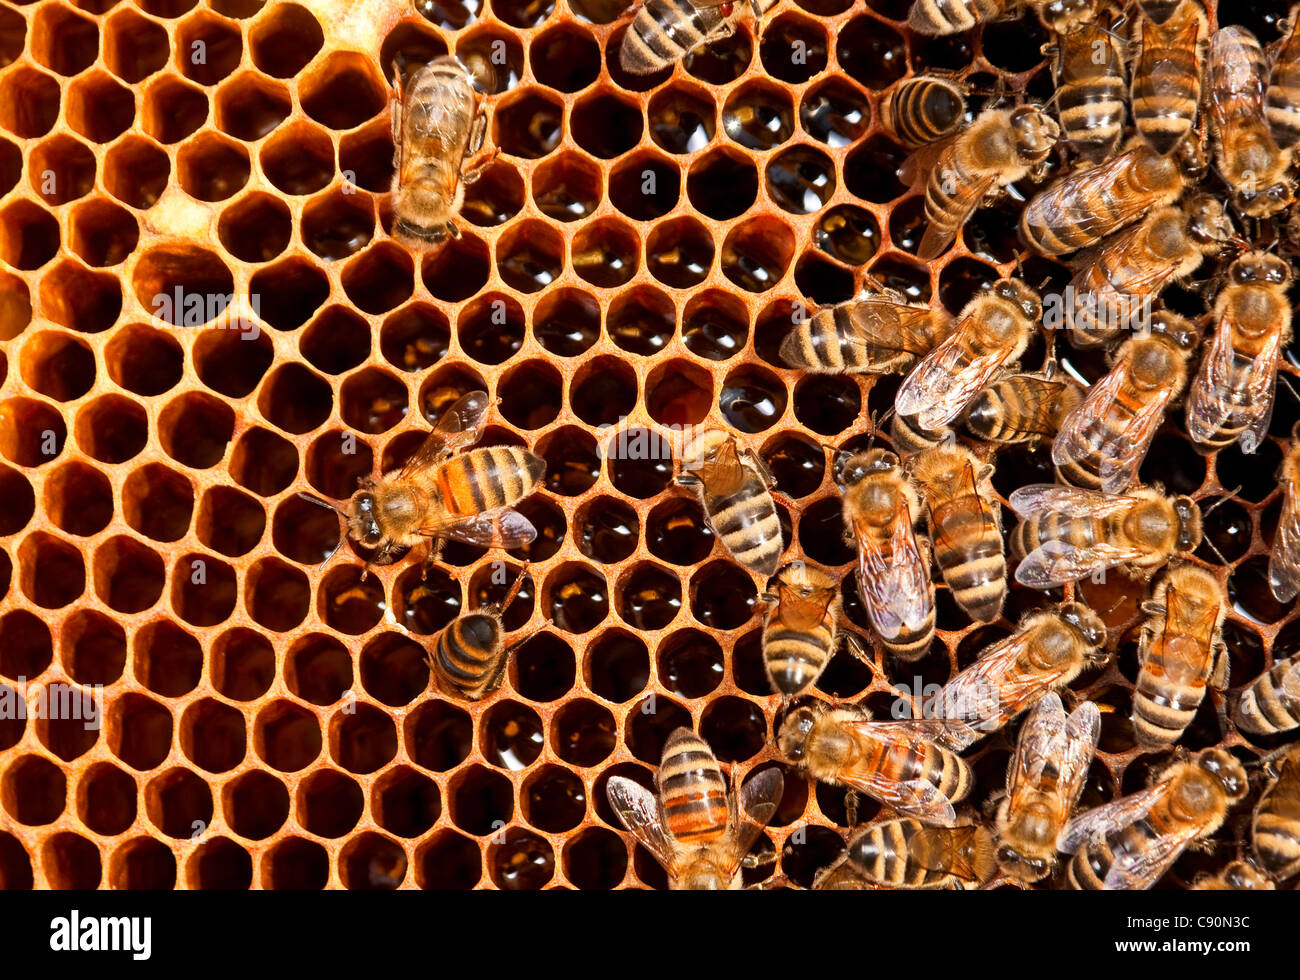 Insects bee working on honeycomb closeup view Stock Photo